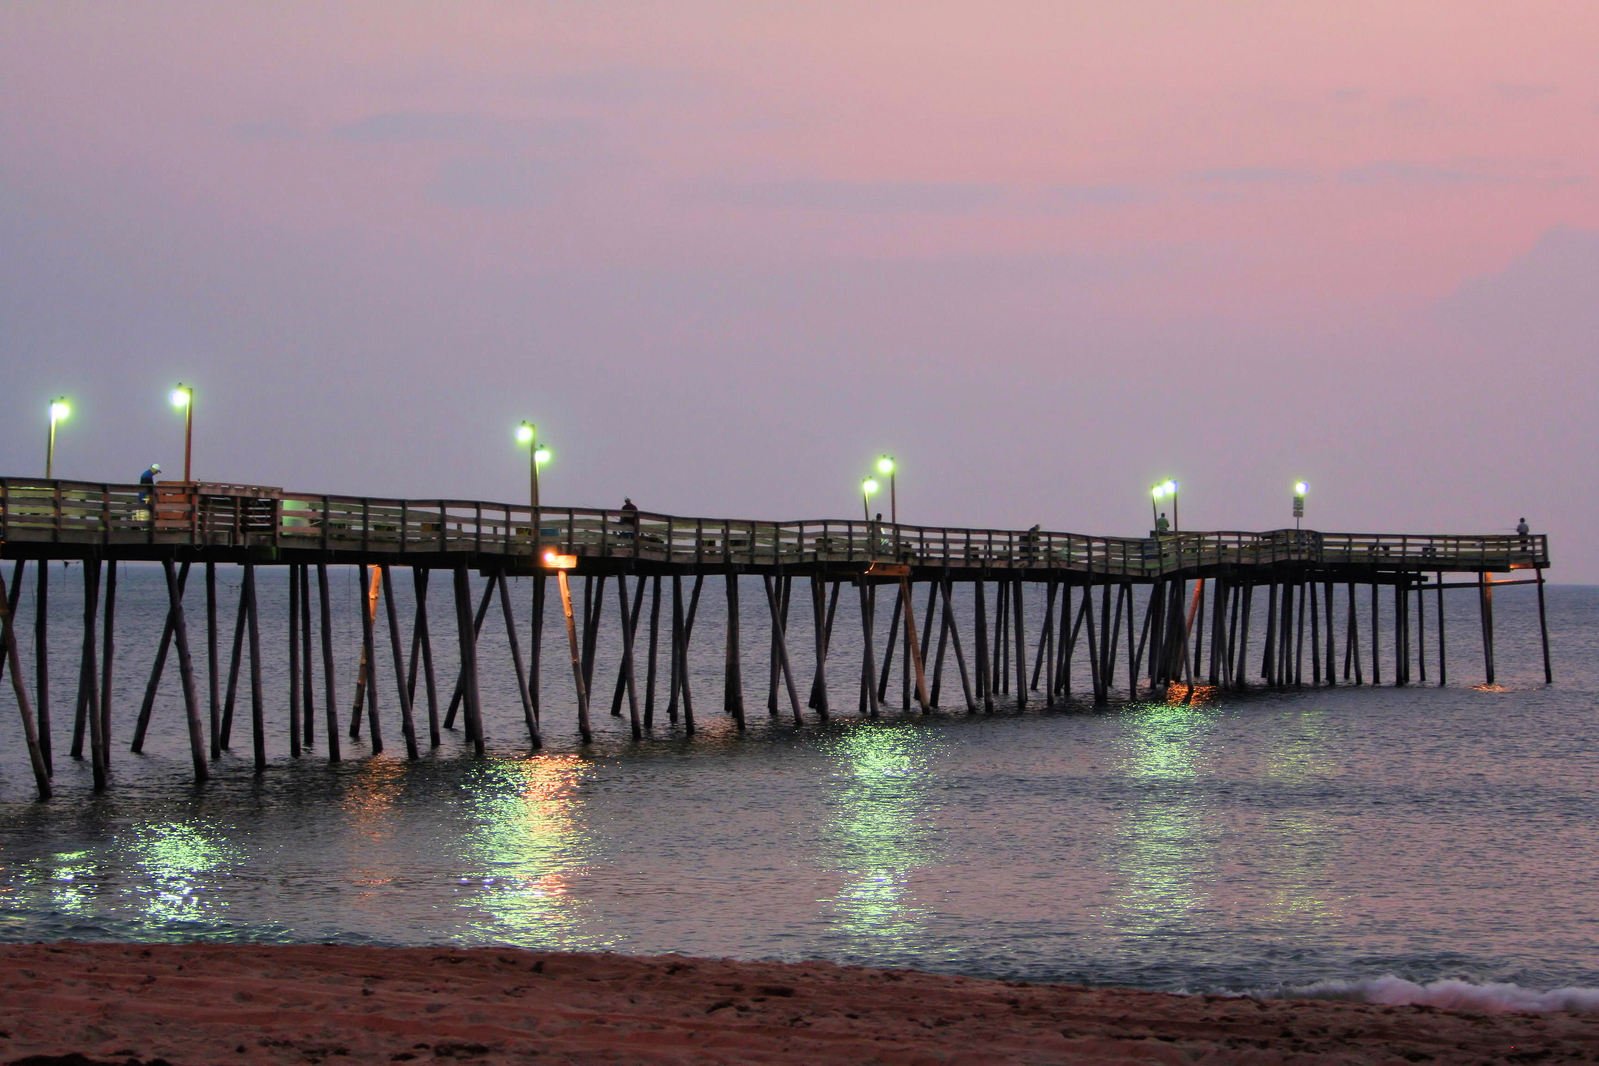 pier illuminated at dusk at the ocean with people walking on it